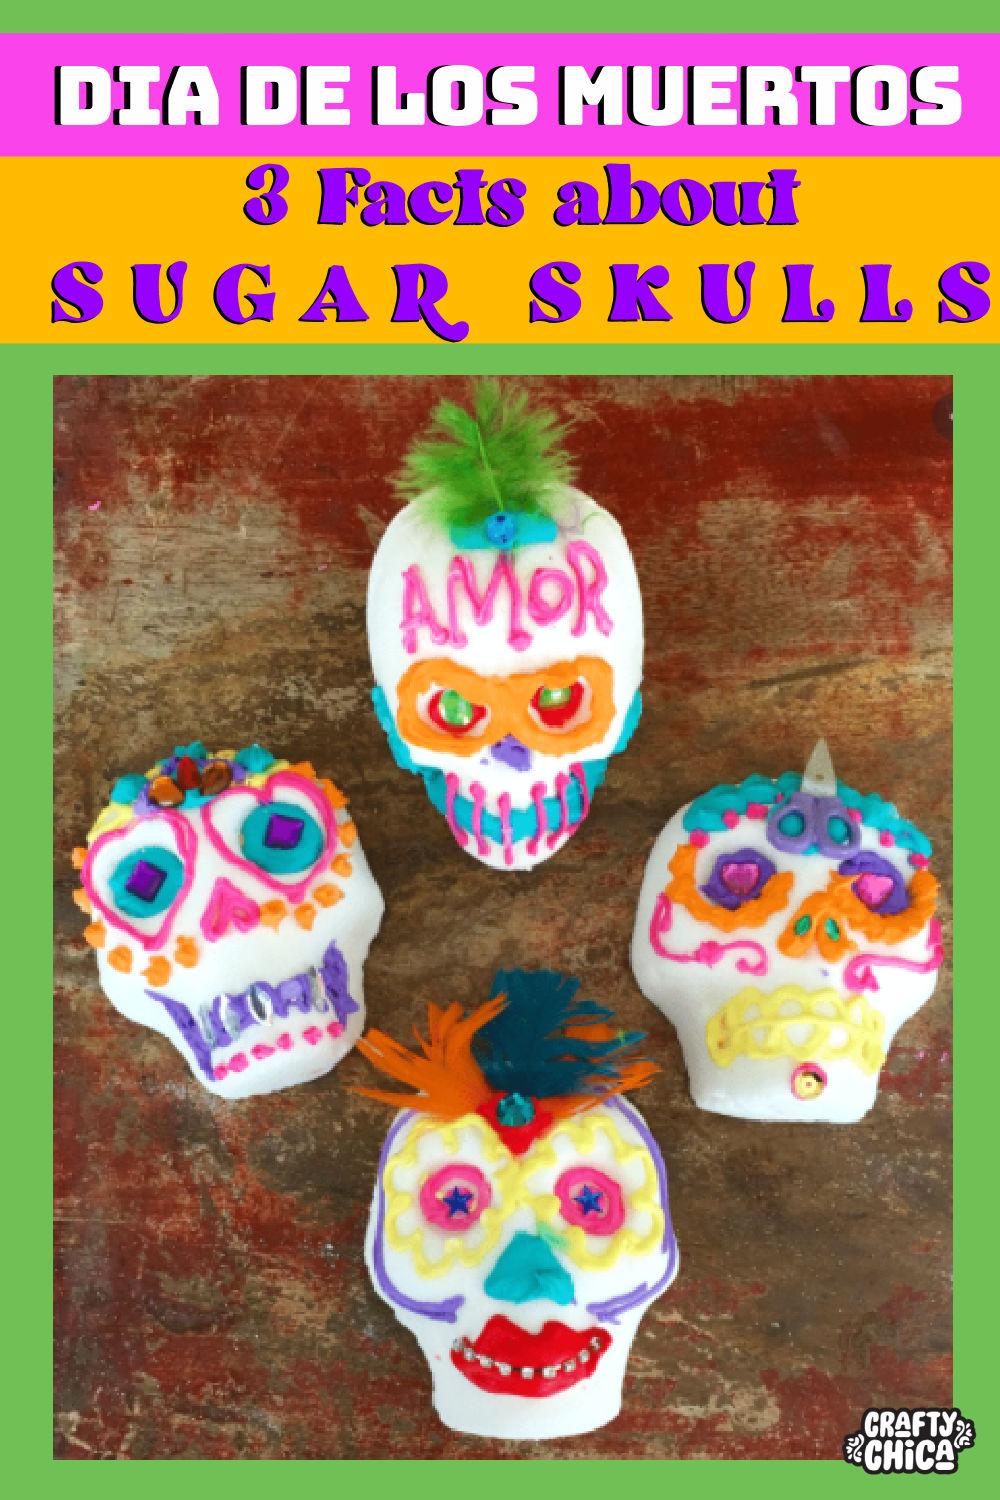 3 facts about sugar skulls! #cr